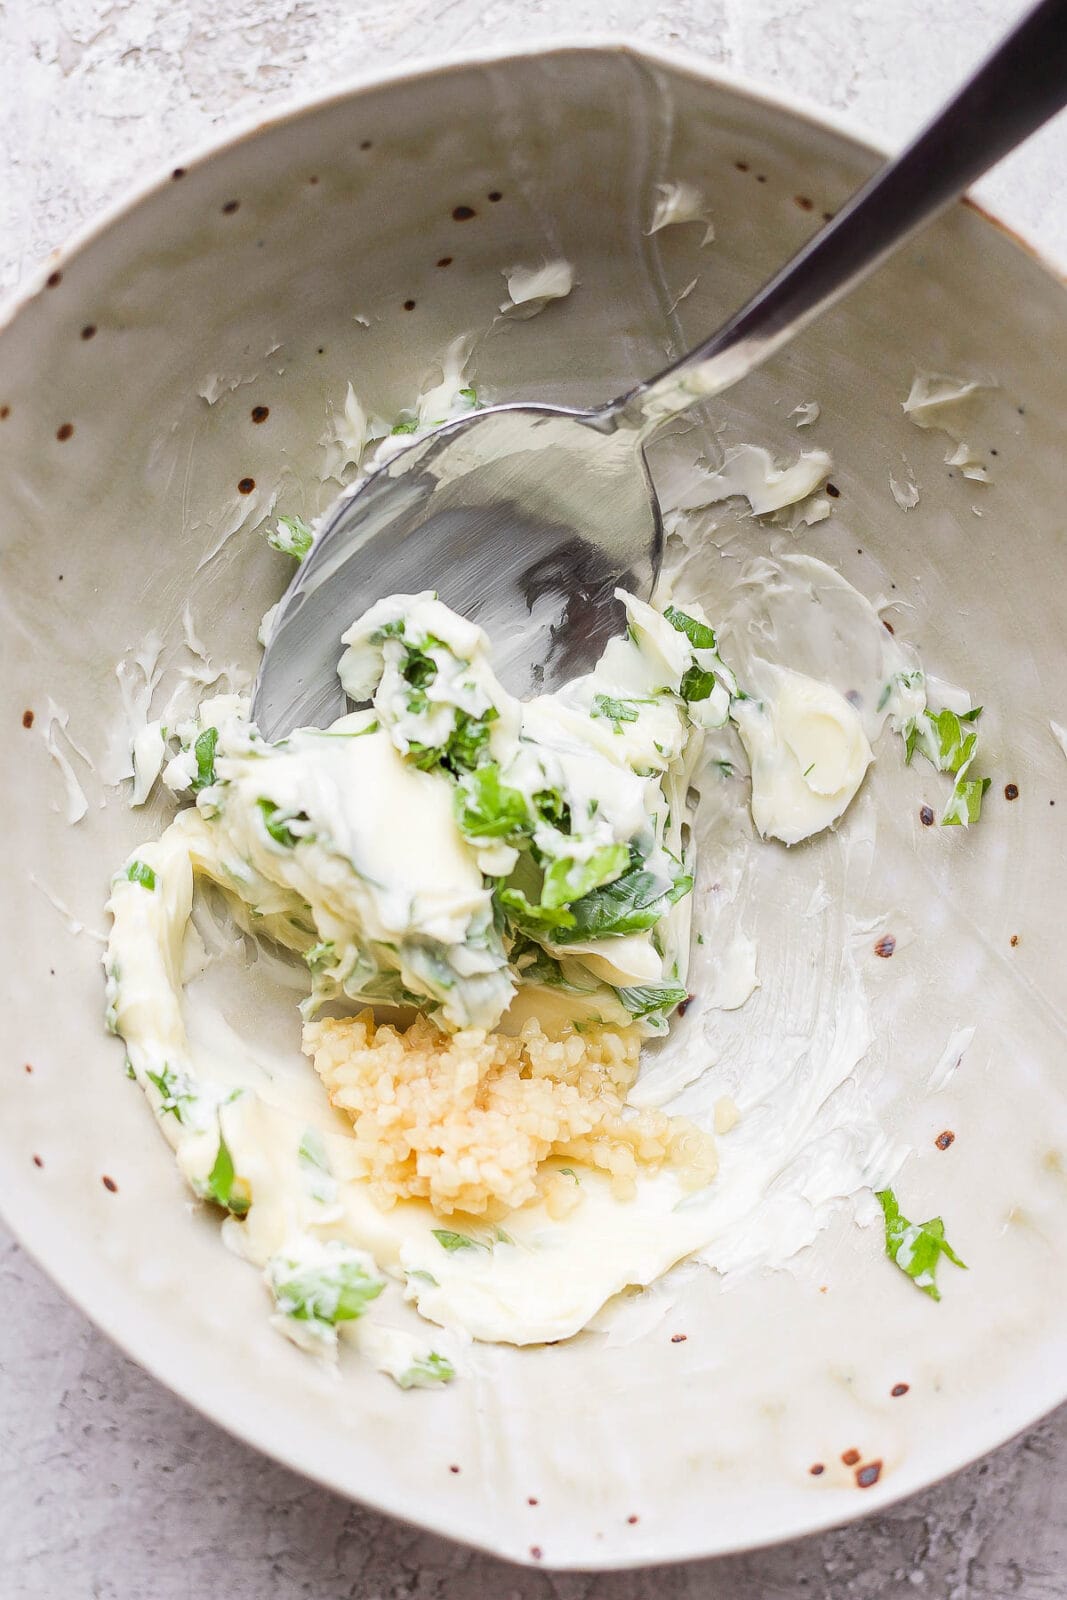 Herbed butter ingredients being mixed in a bowl.